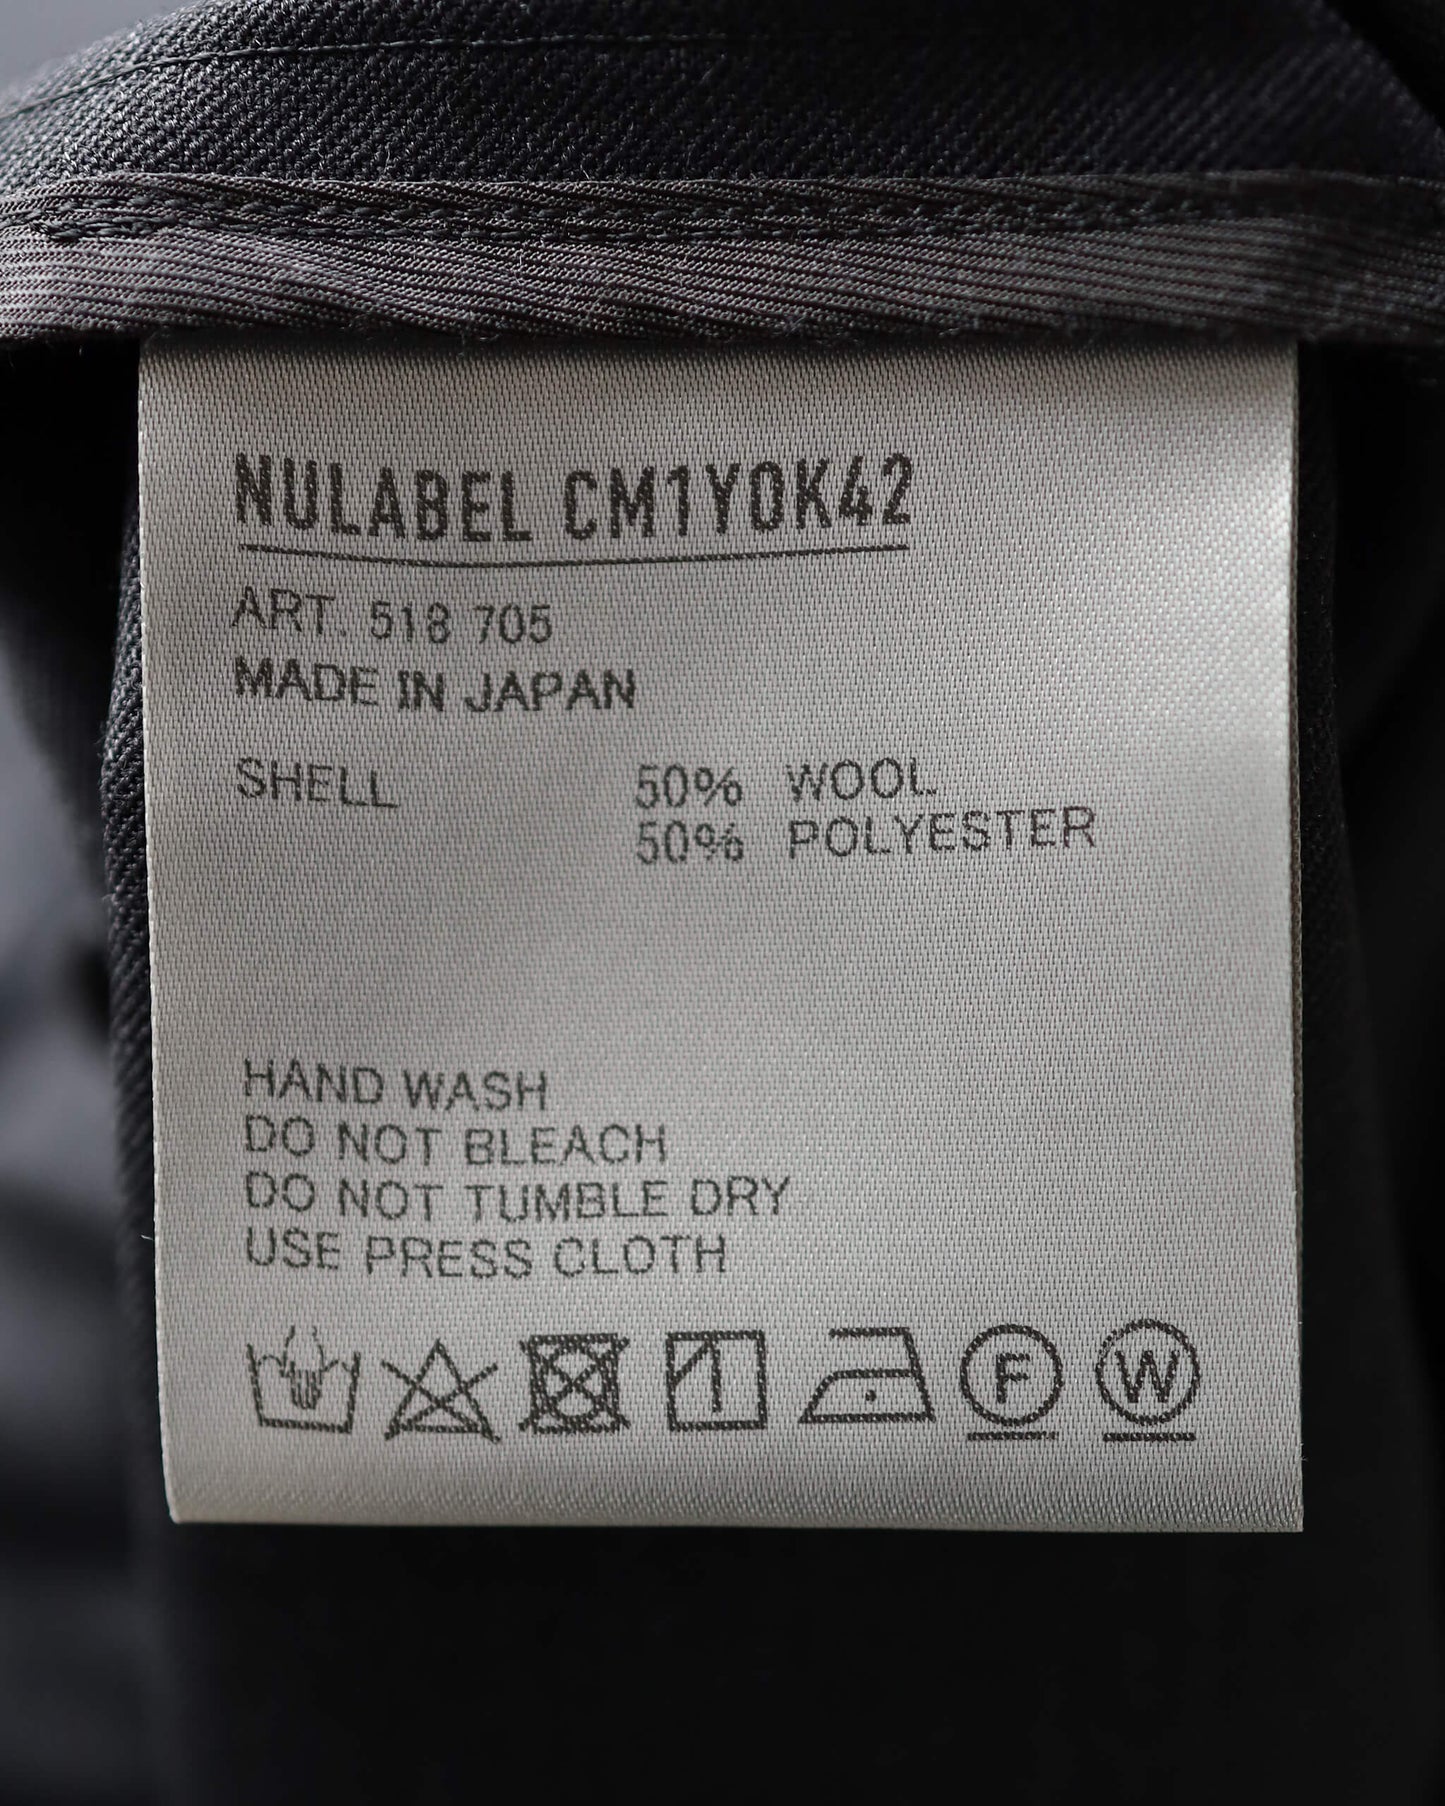 FIELD TROUSERS "CHARCOAL"